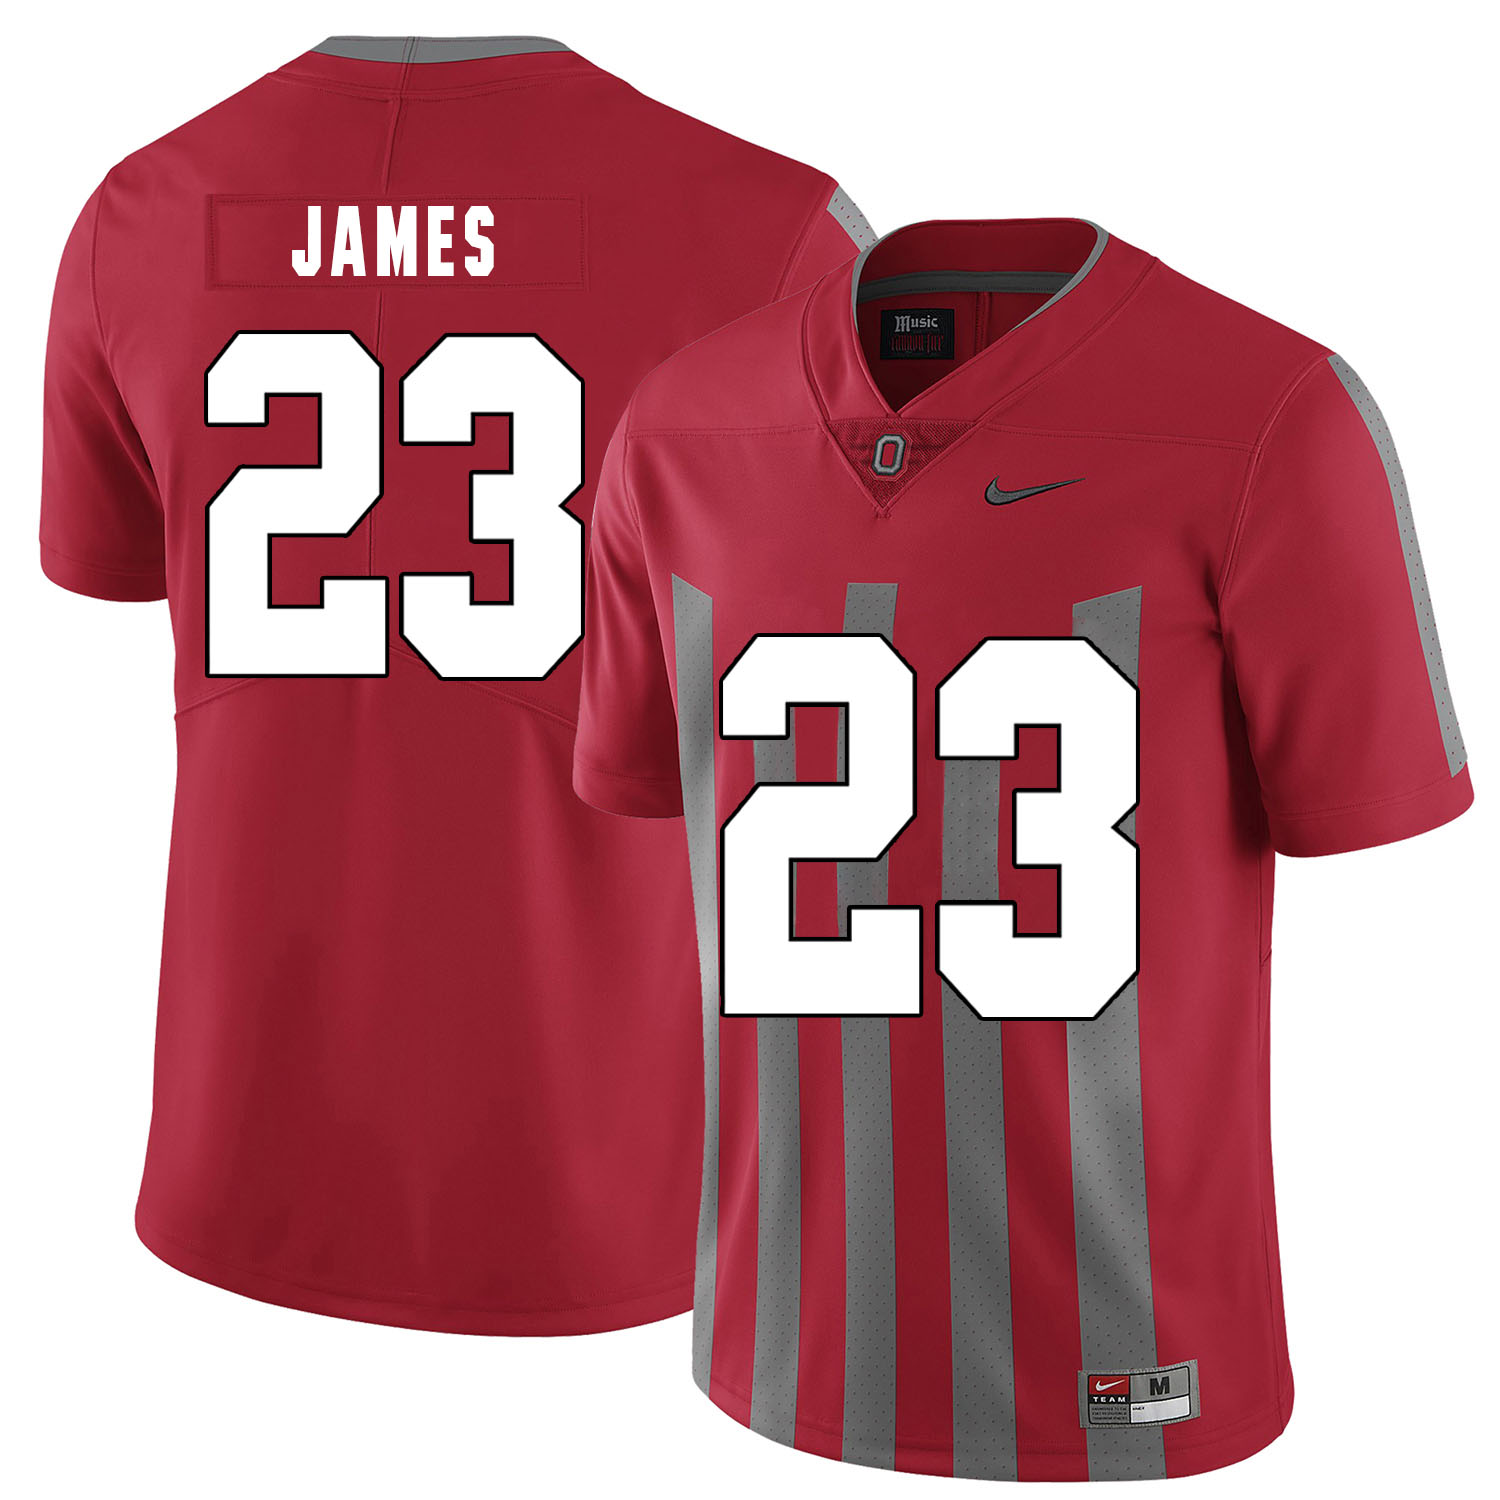 Ohio State Buckeyes 23 Lebron James Red Elite Nike College Football Jersey - Click Image to Close